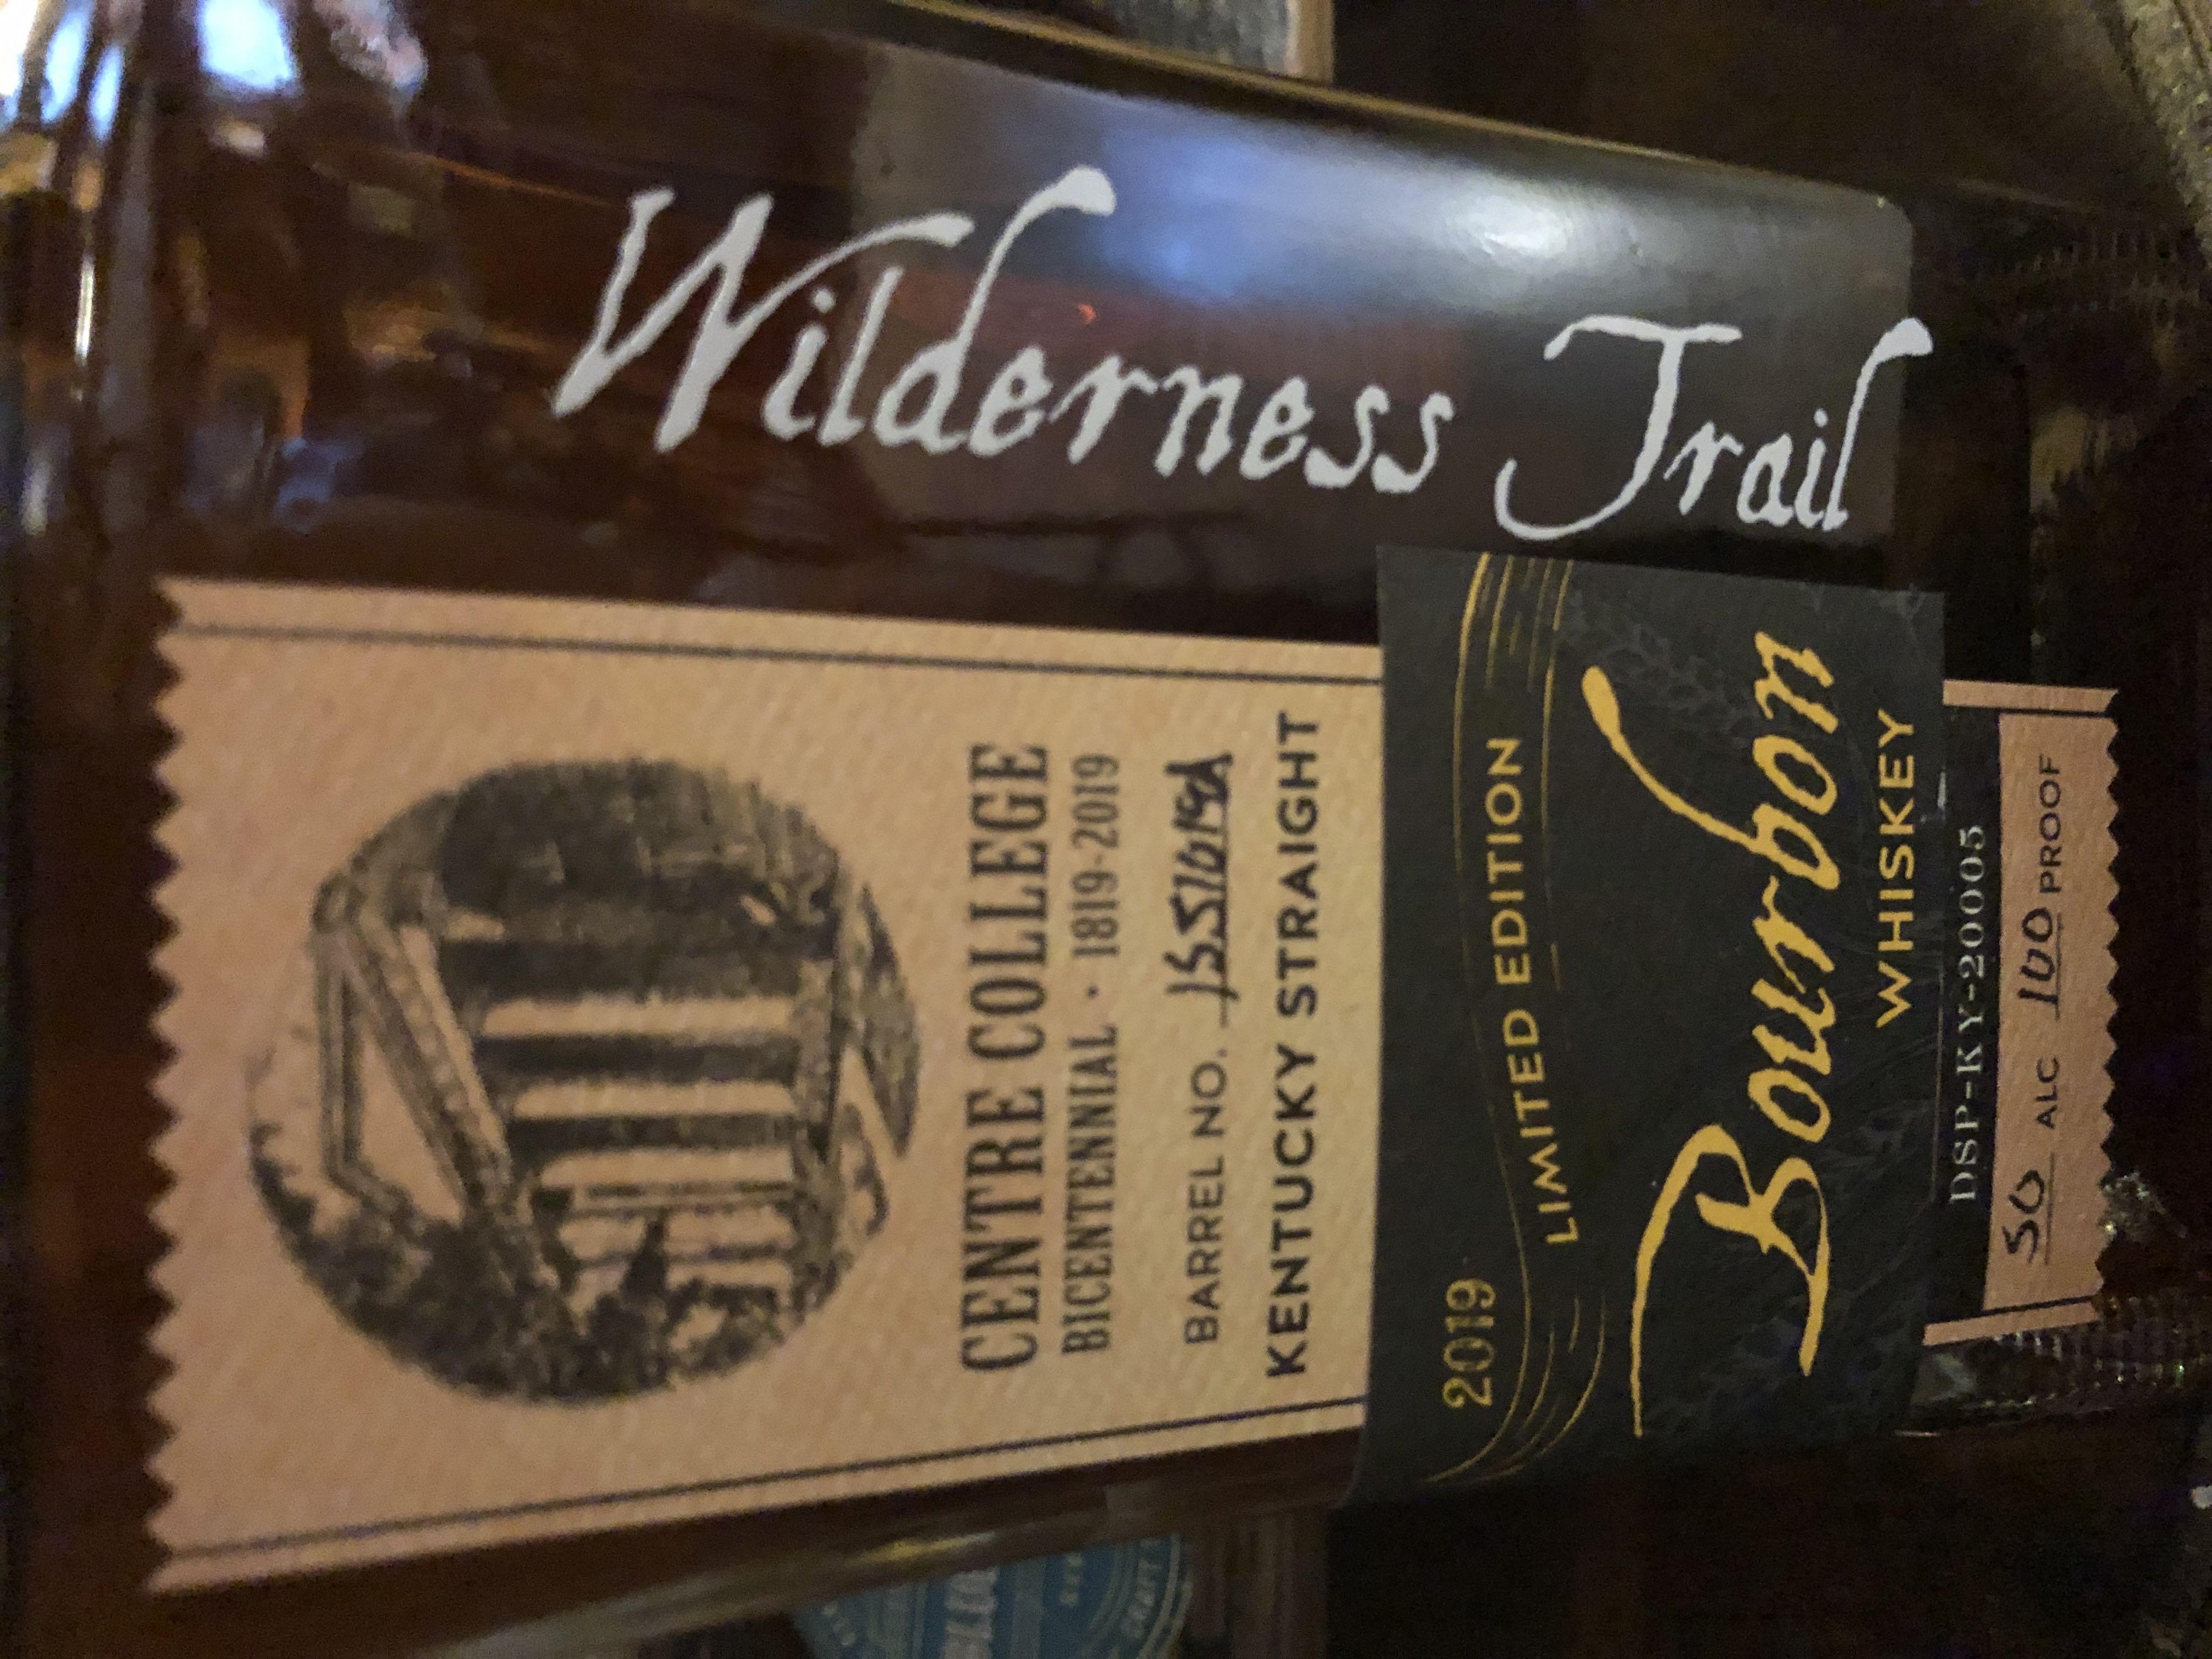 Wilderness Trail Single Barrel - Wilderness Trail Distillery (750 mL) alcohol collectible - Main Image 1